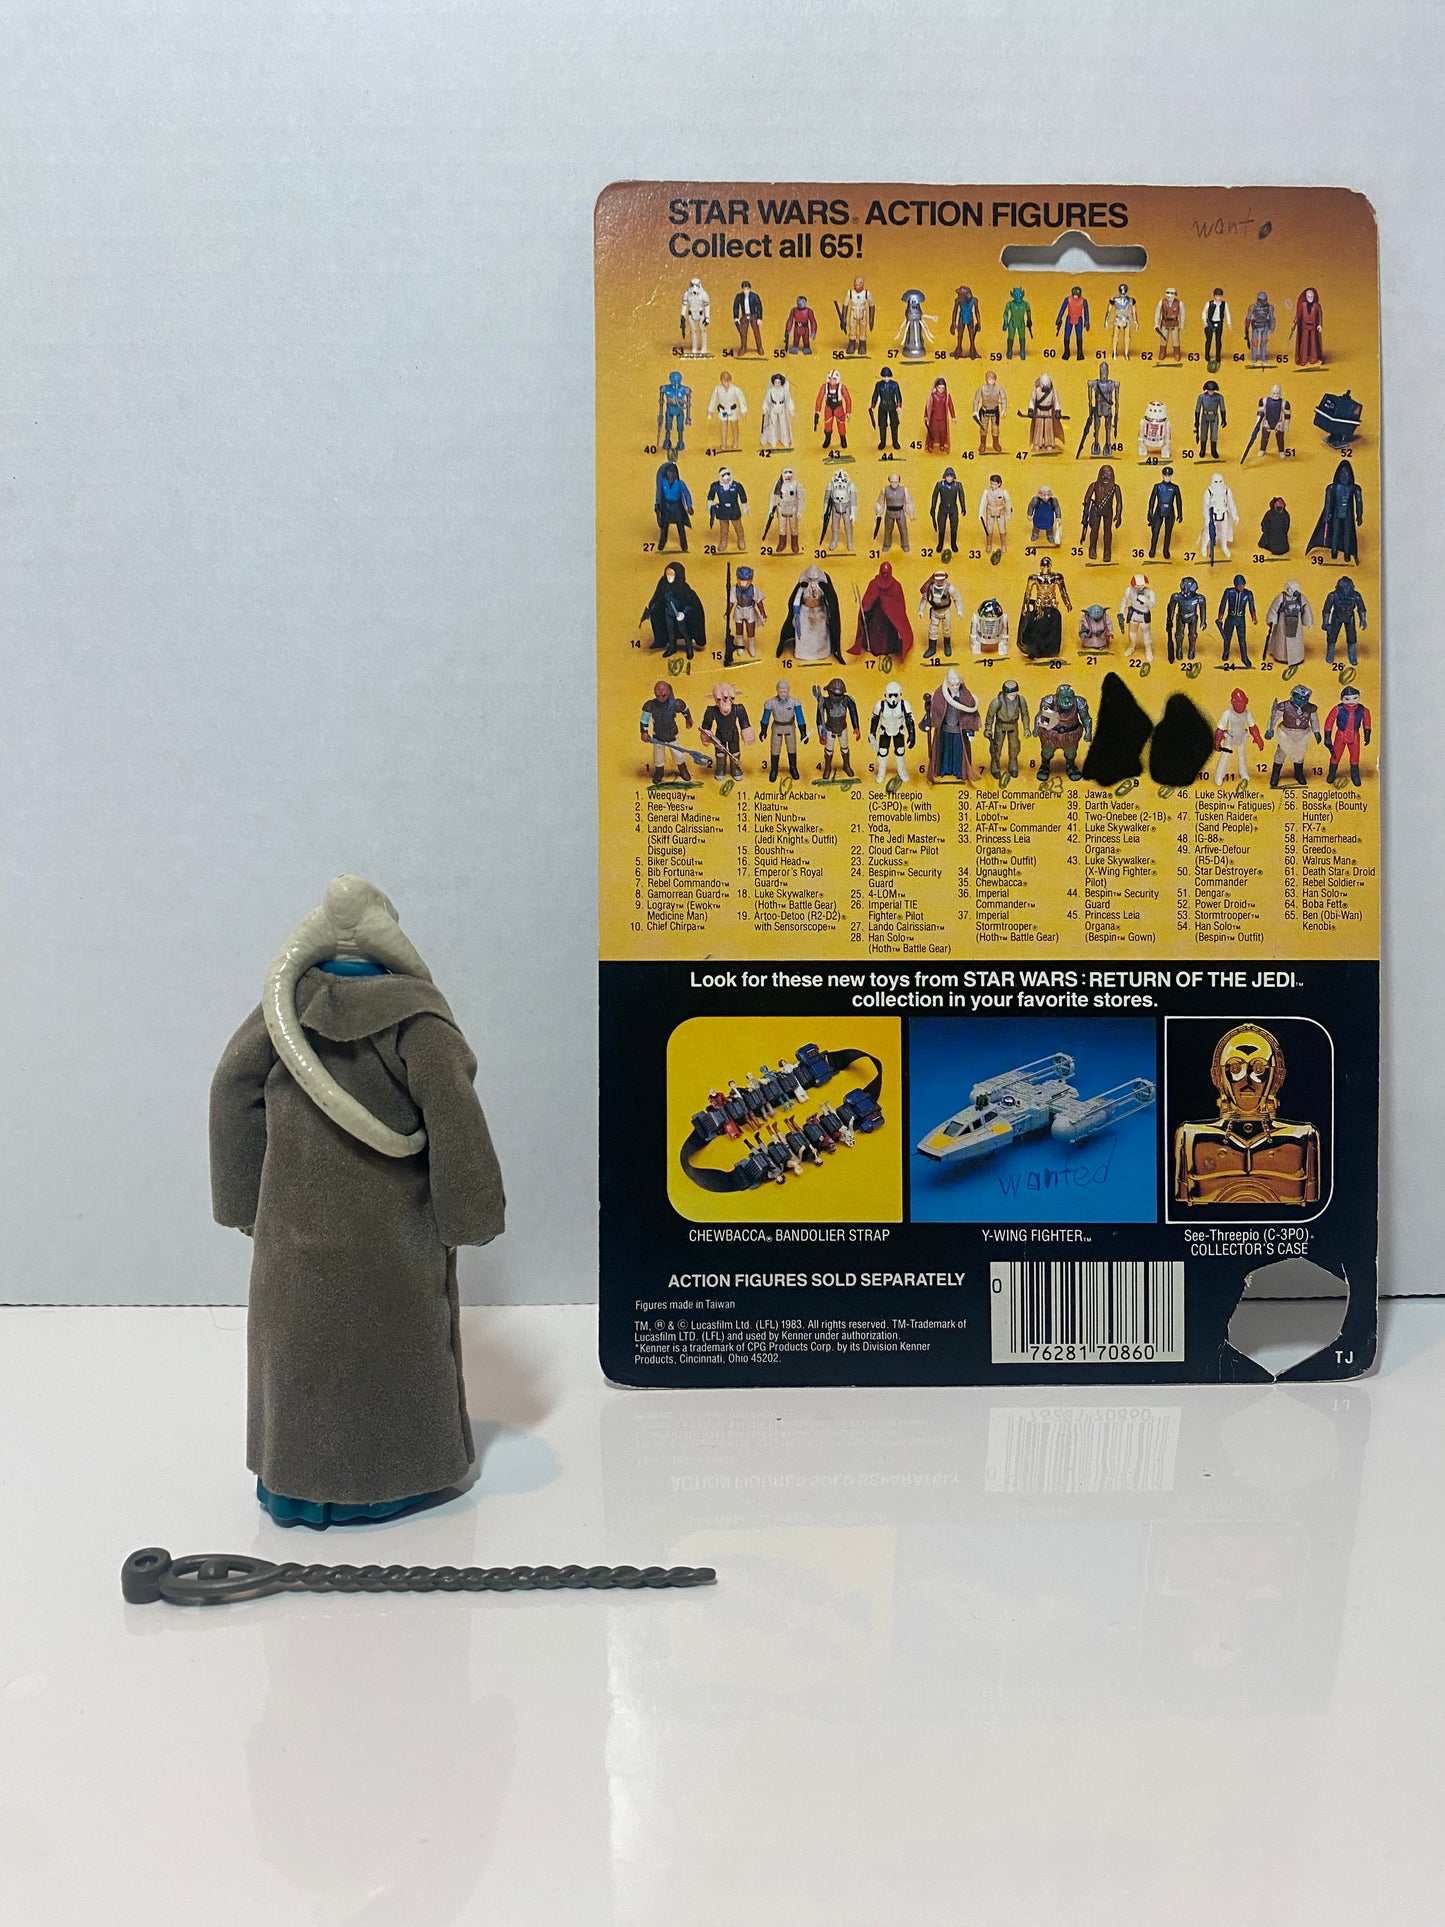 Vintage Star Wars Bib Fortuna Cardback complete with Figure and accessories